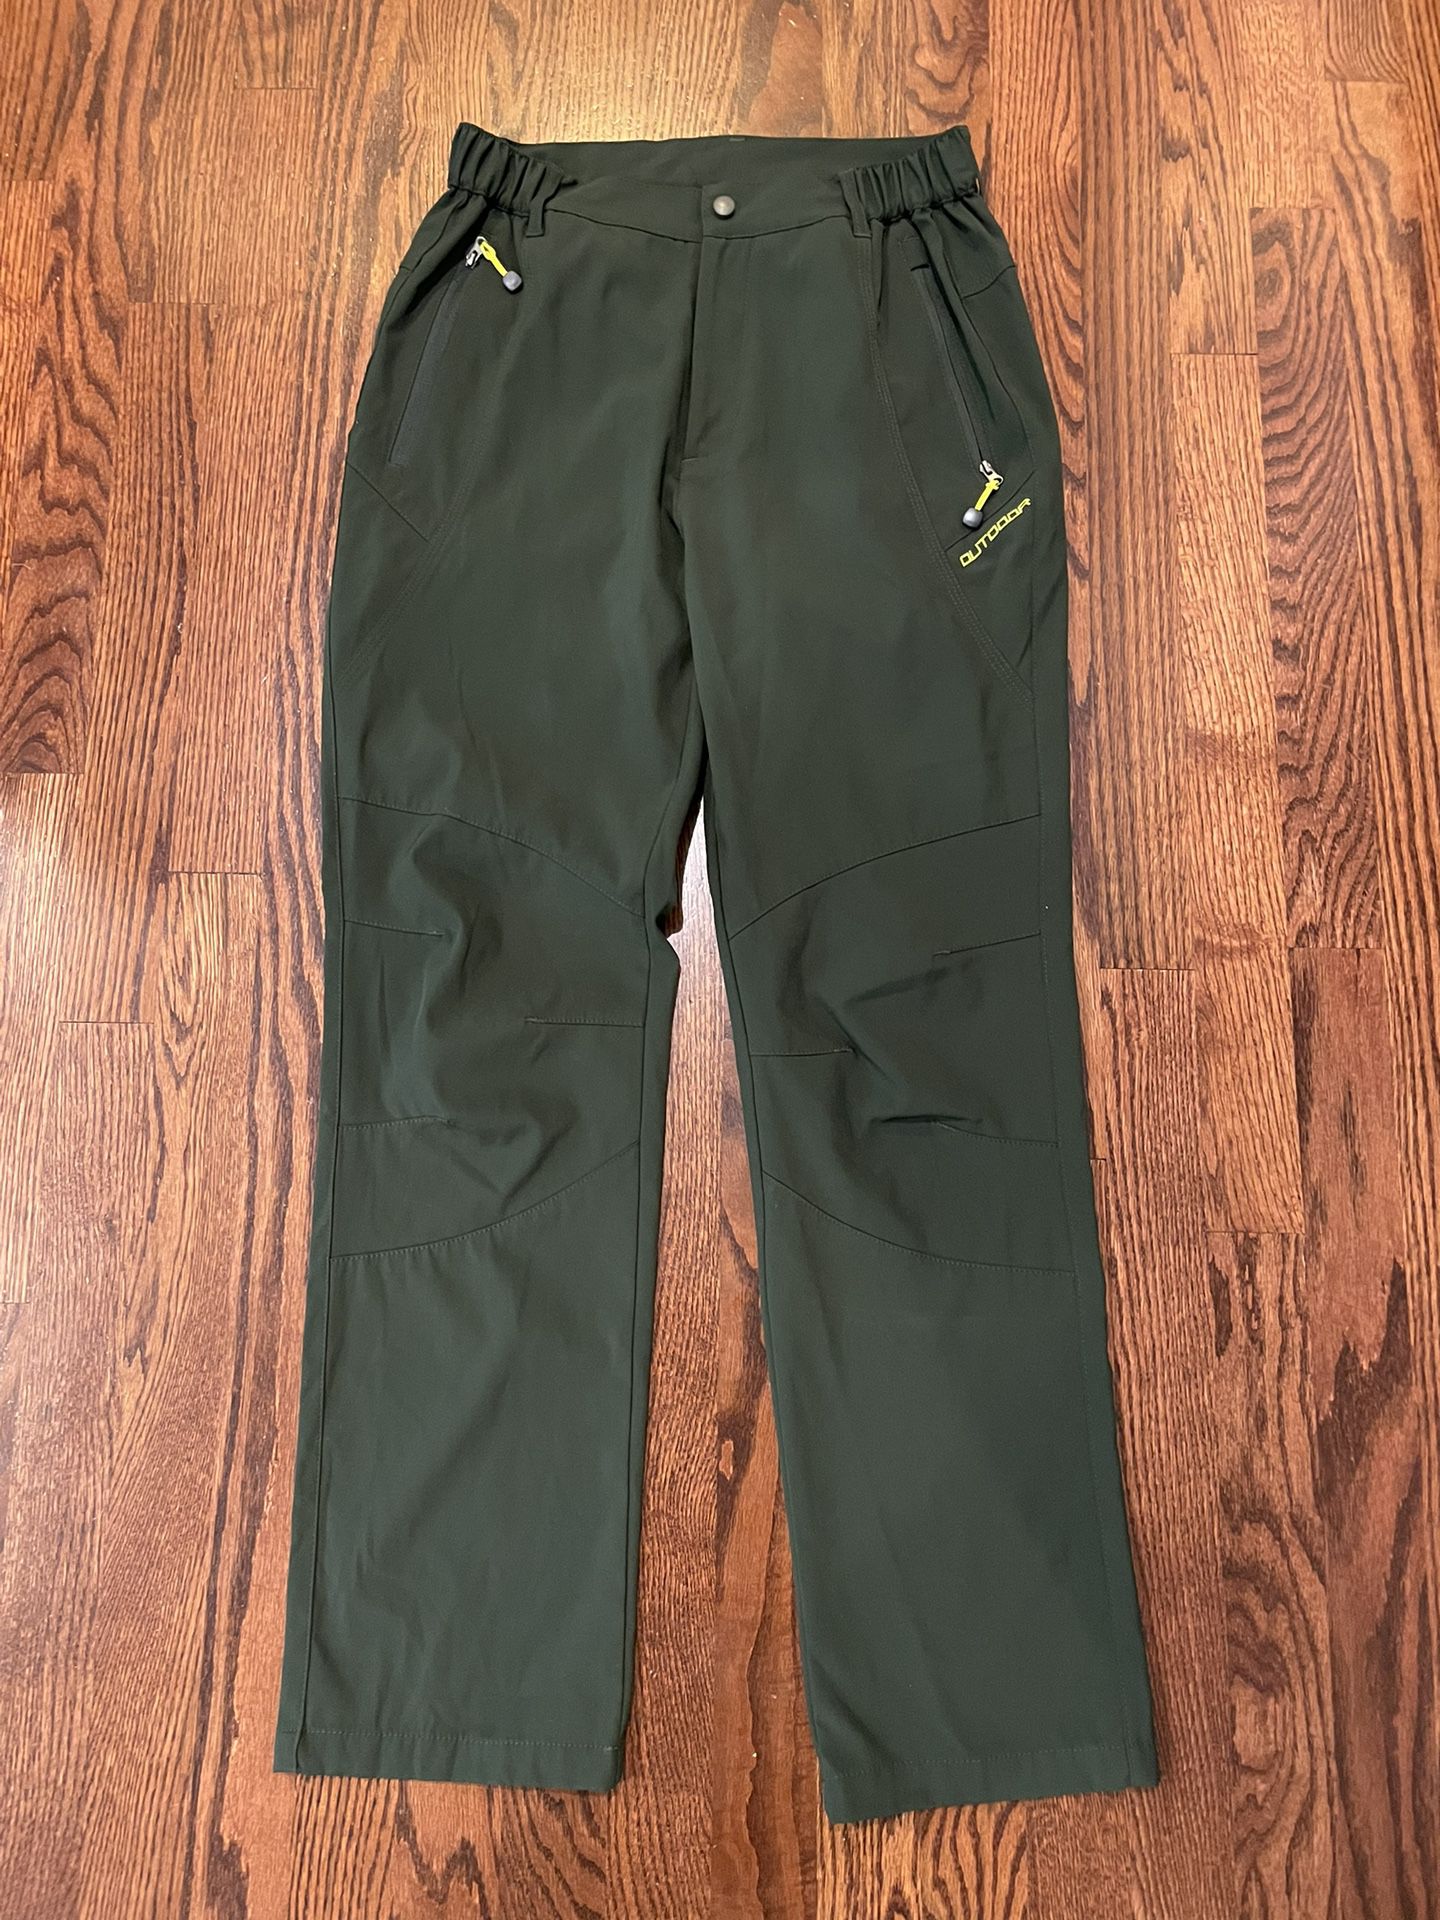 Outdoorsport Collection Hiking Pants Women’s Size Small 